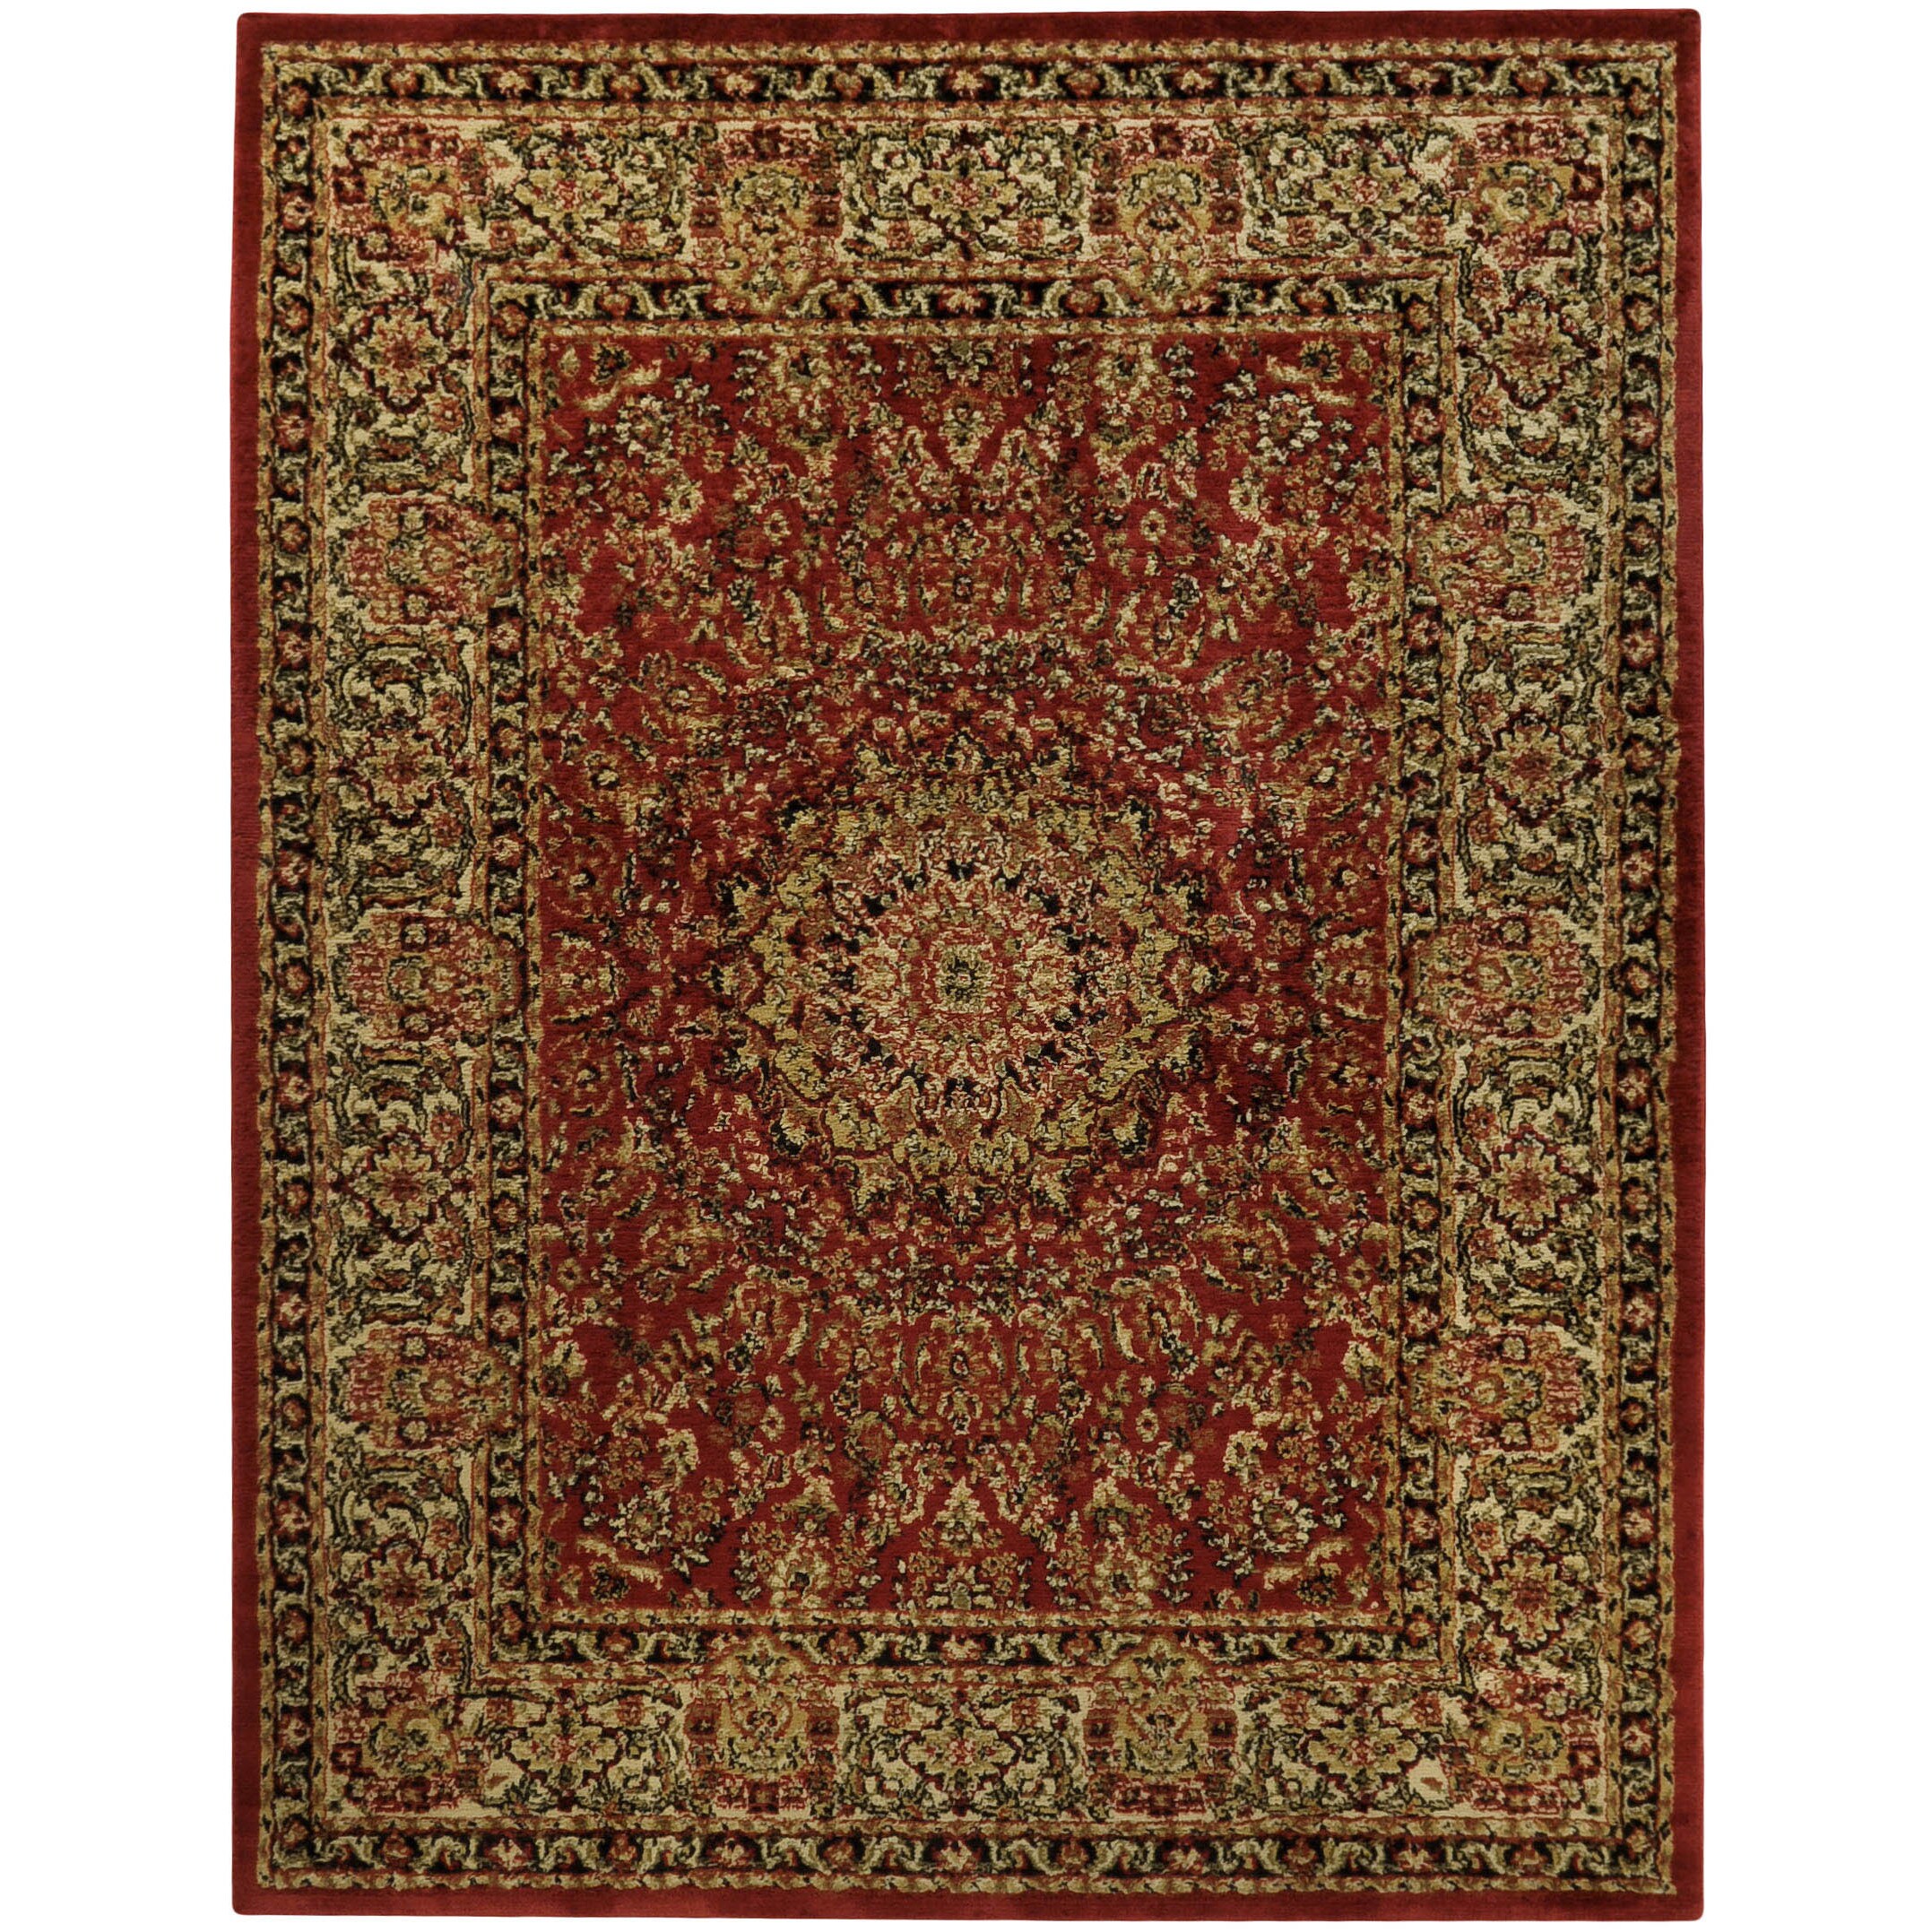 Pasha Collection Medallion Traditional Red Area Rug (53 X 611)